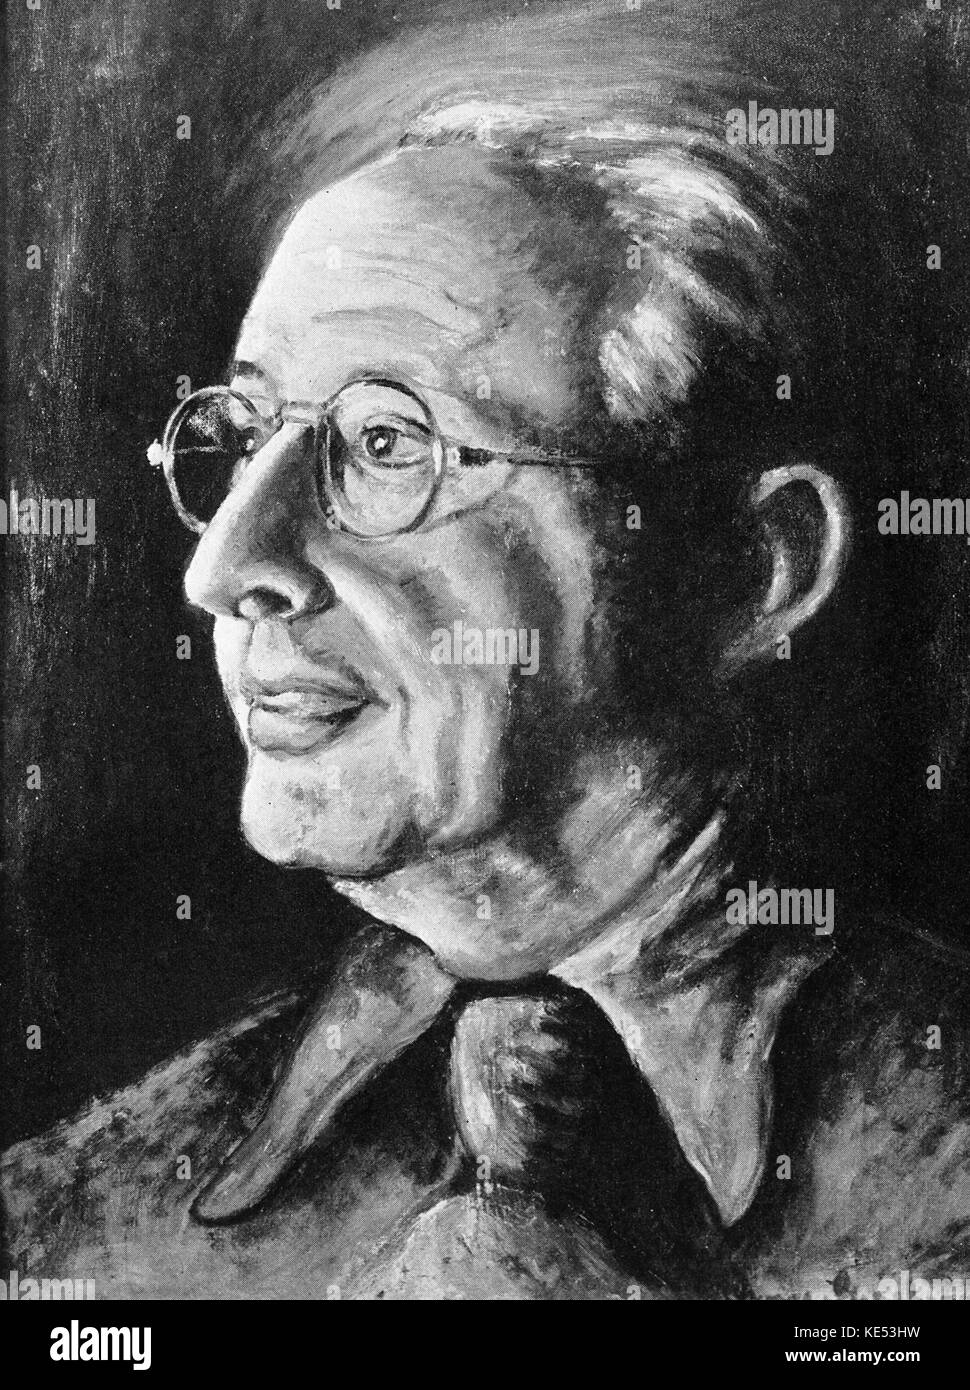 George Gershwin 's painting of of Jerome Kern 1937  (American composer 27  January  1885 –11  November  1945). GG: American composer & pianist, 26th September 1898 - 11th July 1937 Stock Photo